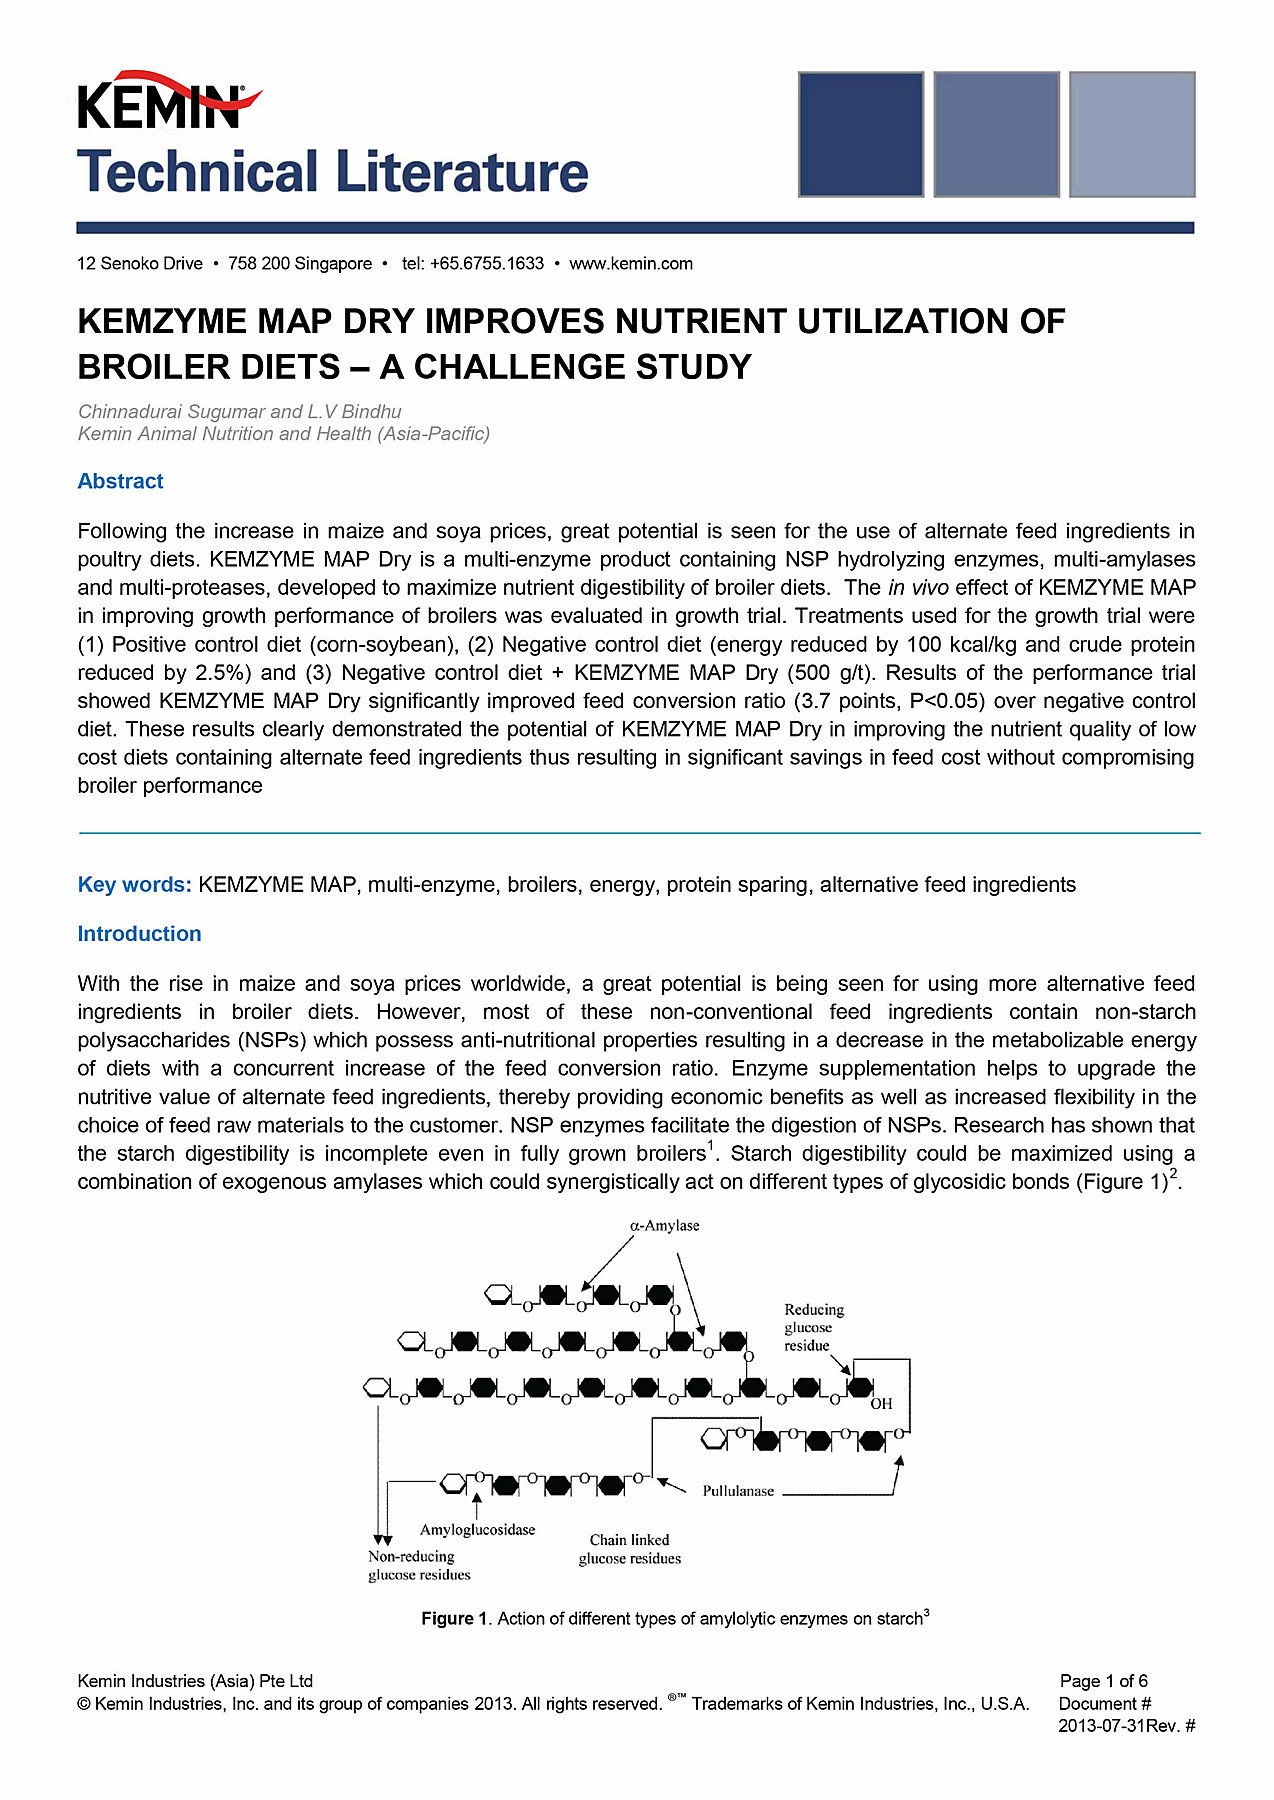 16_july_tl-13-00041_kemzyme_map_dry_improves_nutrient_utilization_of_broiler_diets_a_challenge_study-01